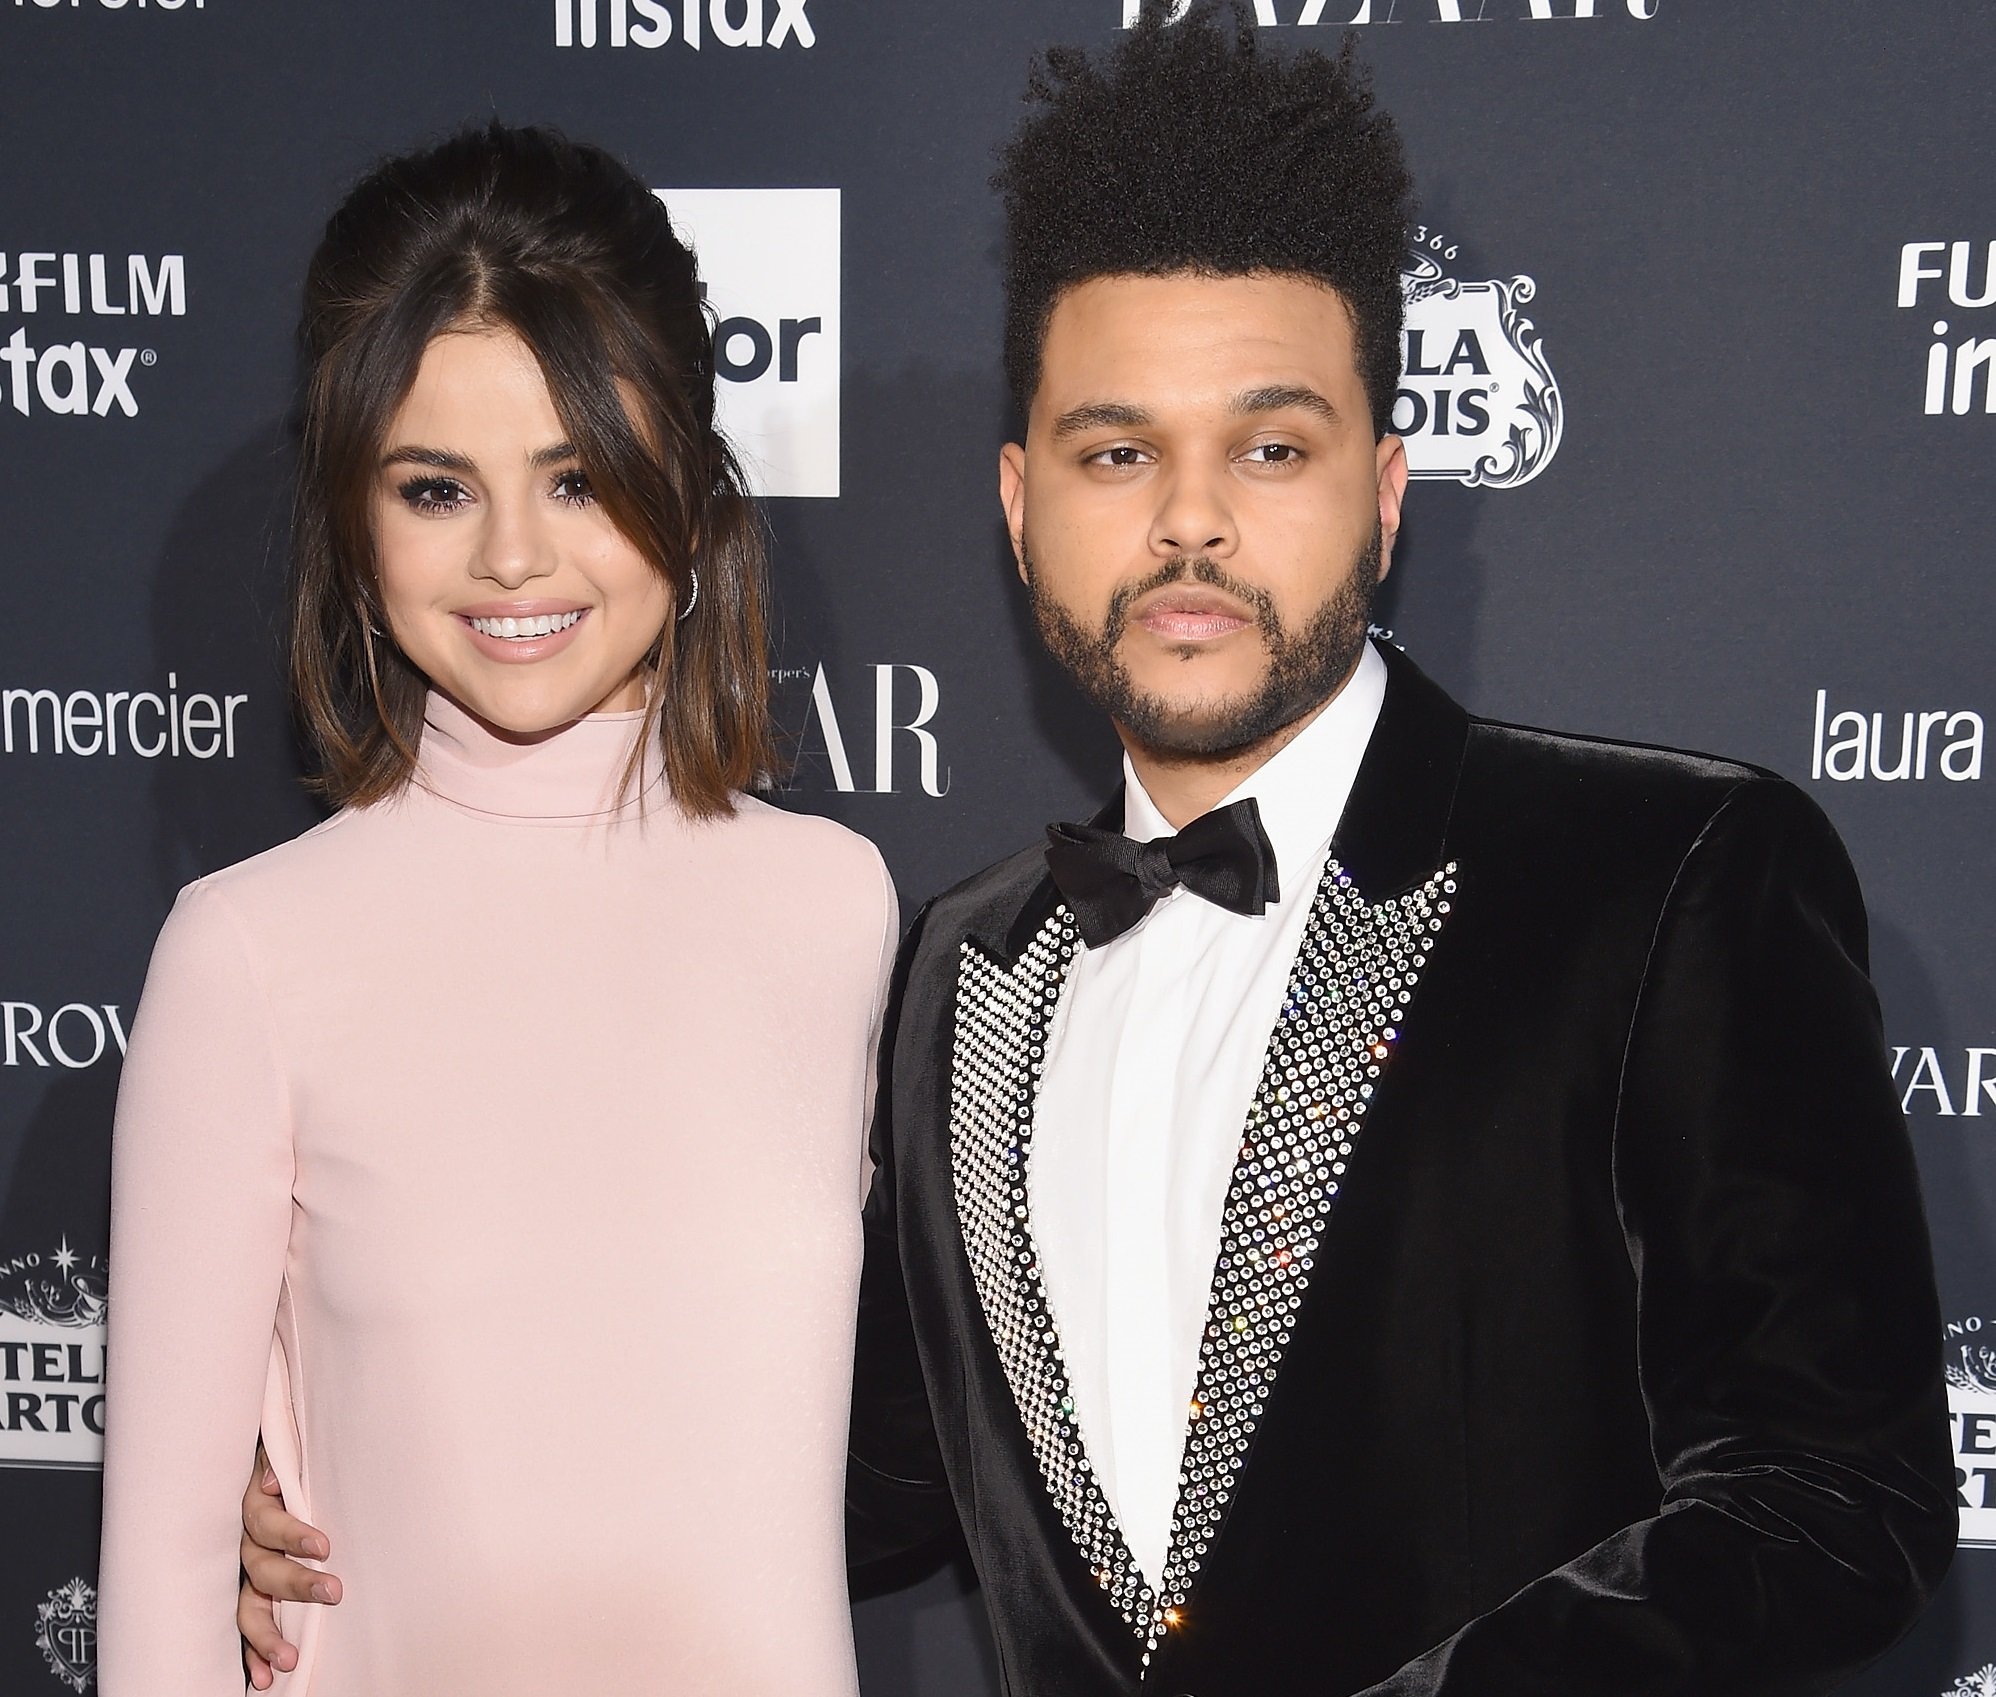 Selena Gomez (L) and The Weeknd on September 8, 2017 in New York City. 